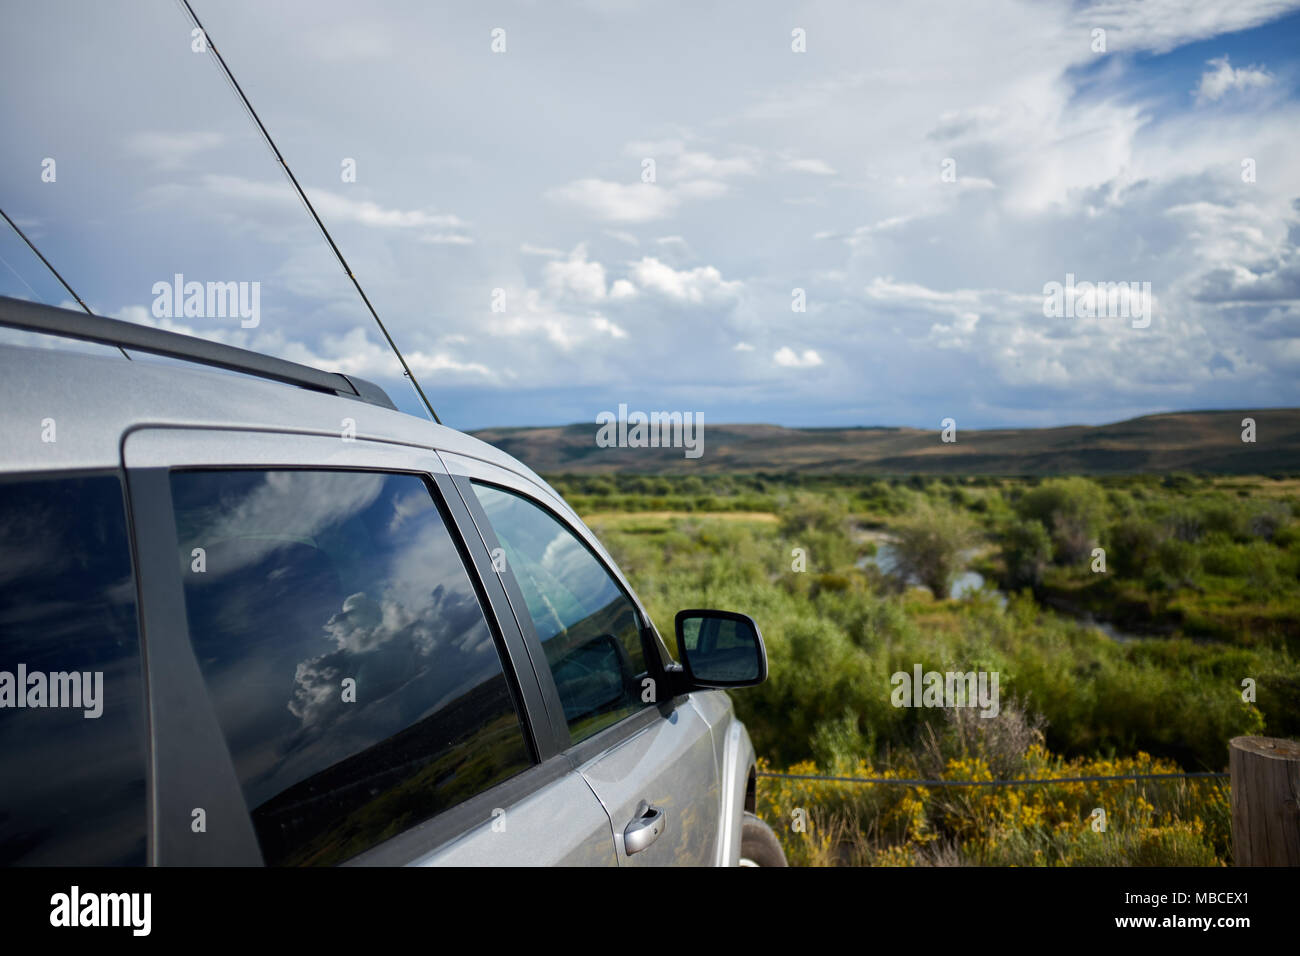 Car parked overlooking the Hams Fork River, Wyoming with two fly fishing  rods resting on the bonnet or hood on a cloudy day Stock Photo - Alamy